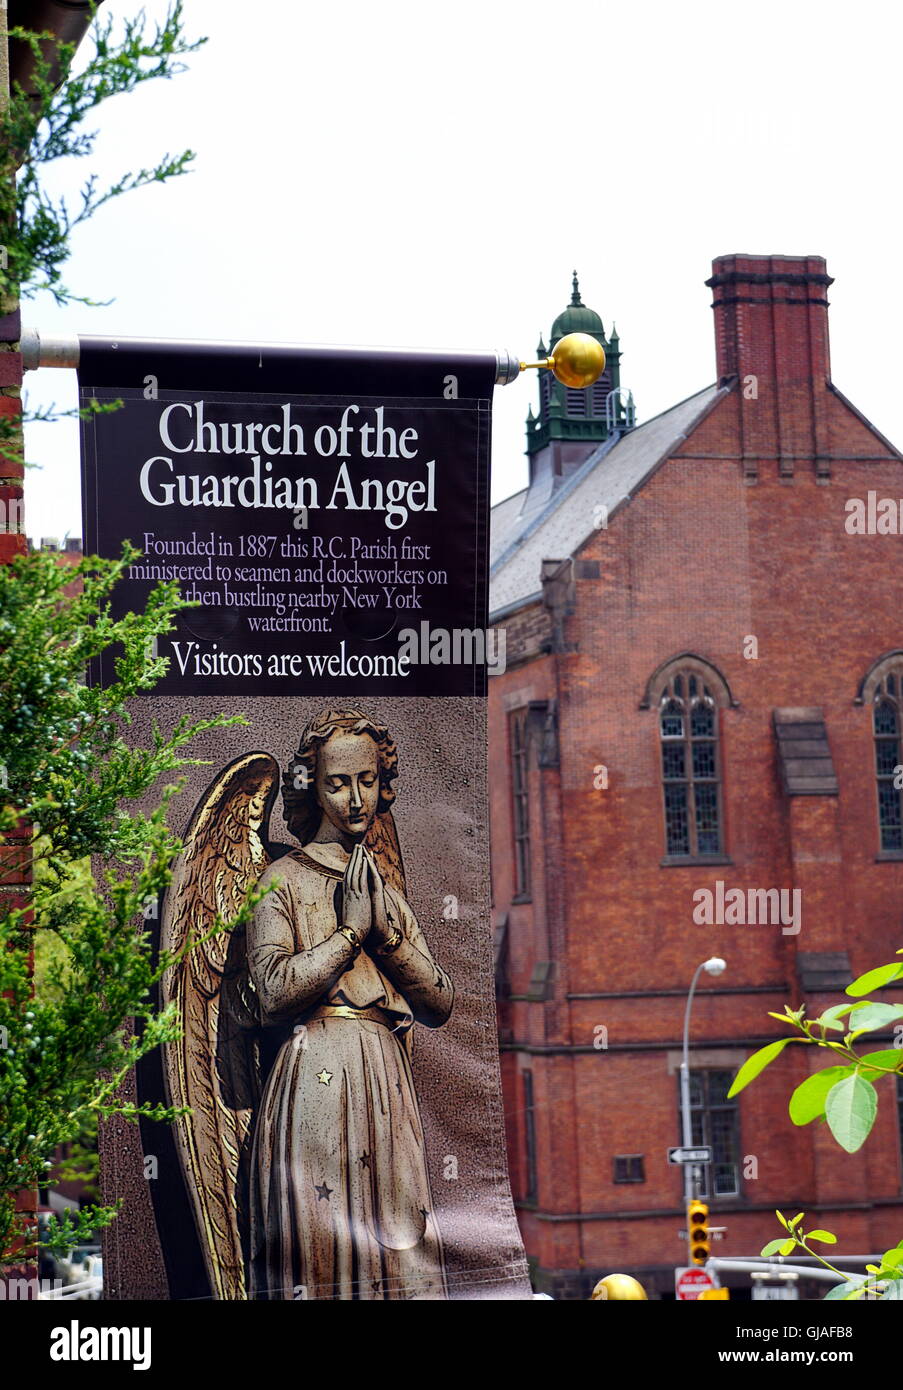 A view of the Church of the Guardian Angel from the High Line in the Chelsea area of New York City, NY, USA Stock Photo